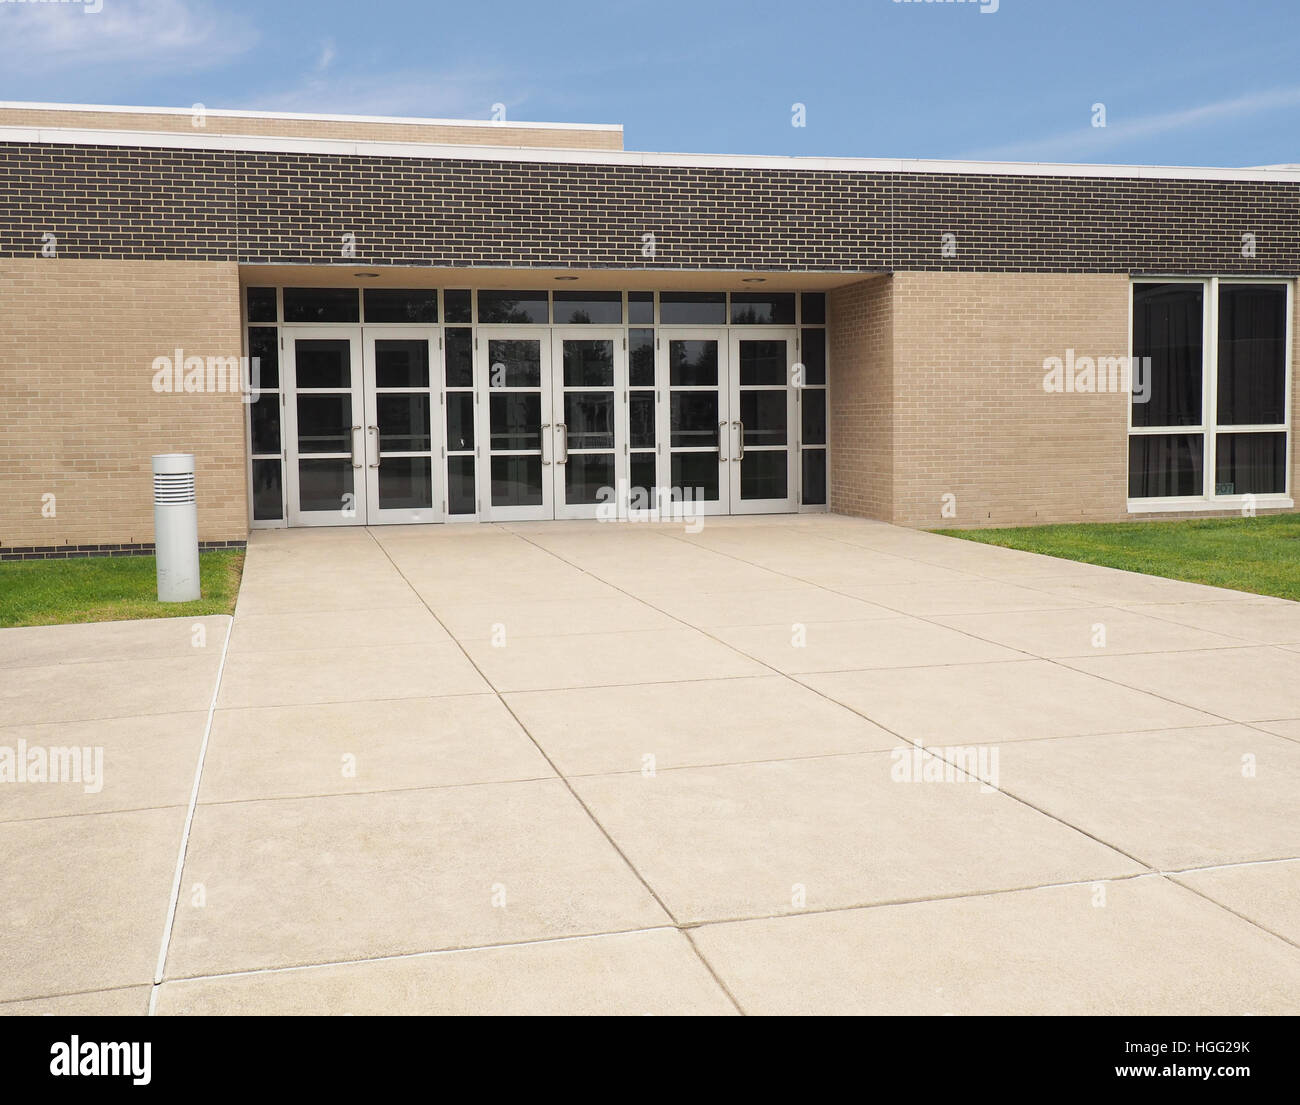 entry doors for a modern school building Stock Photo